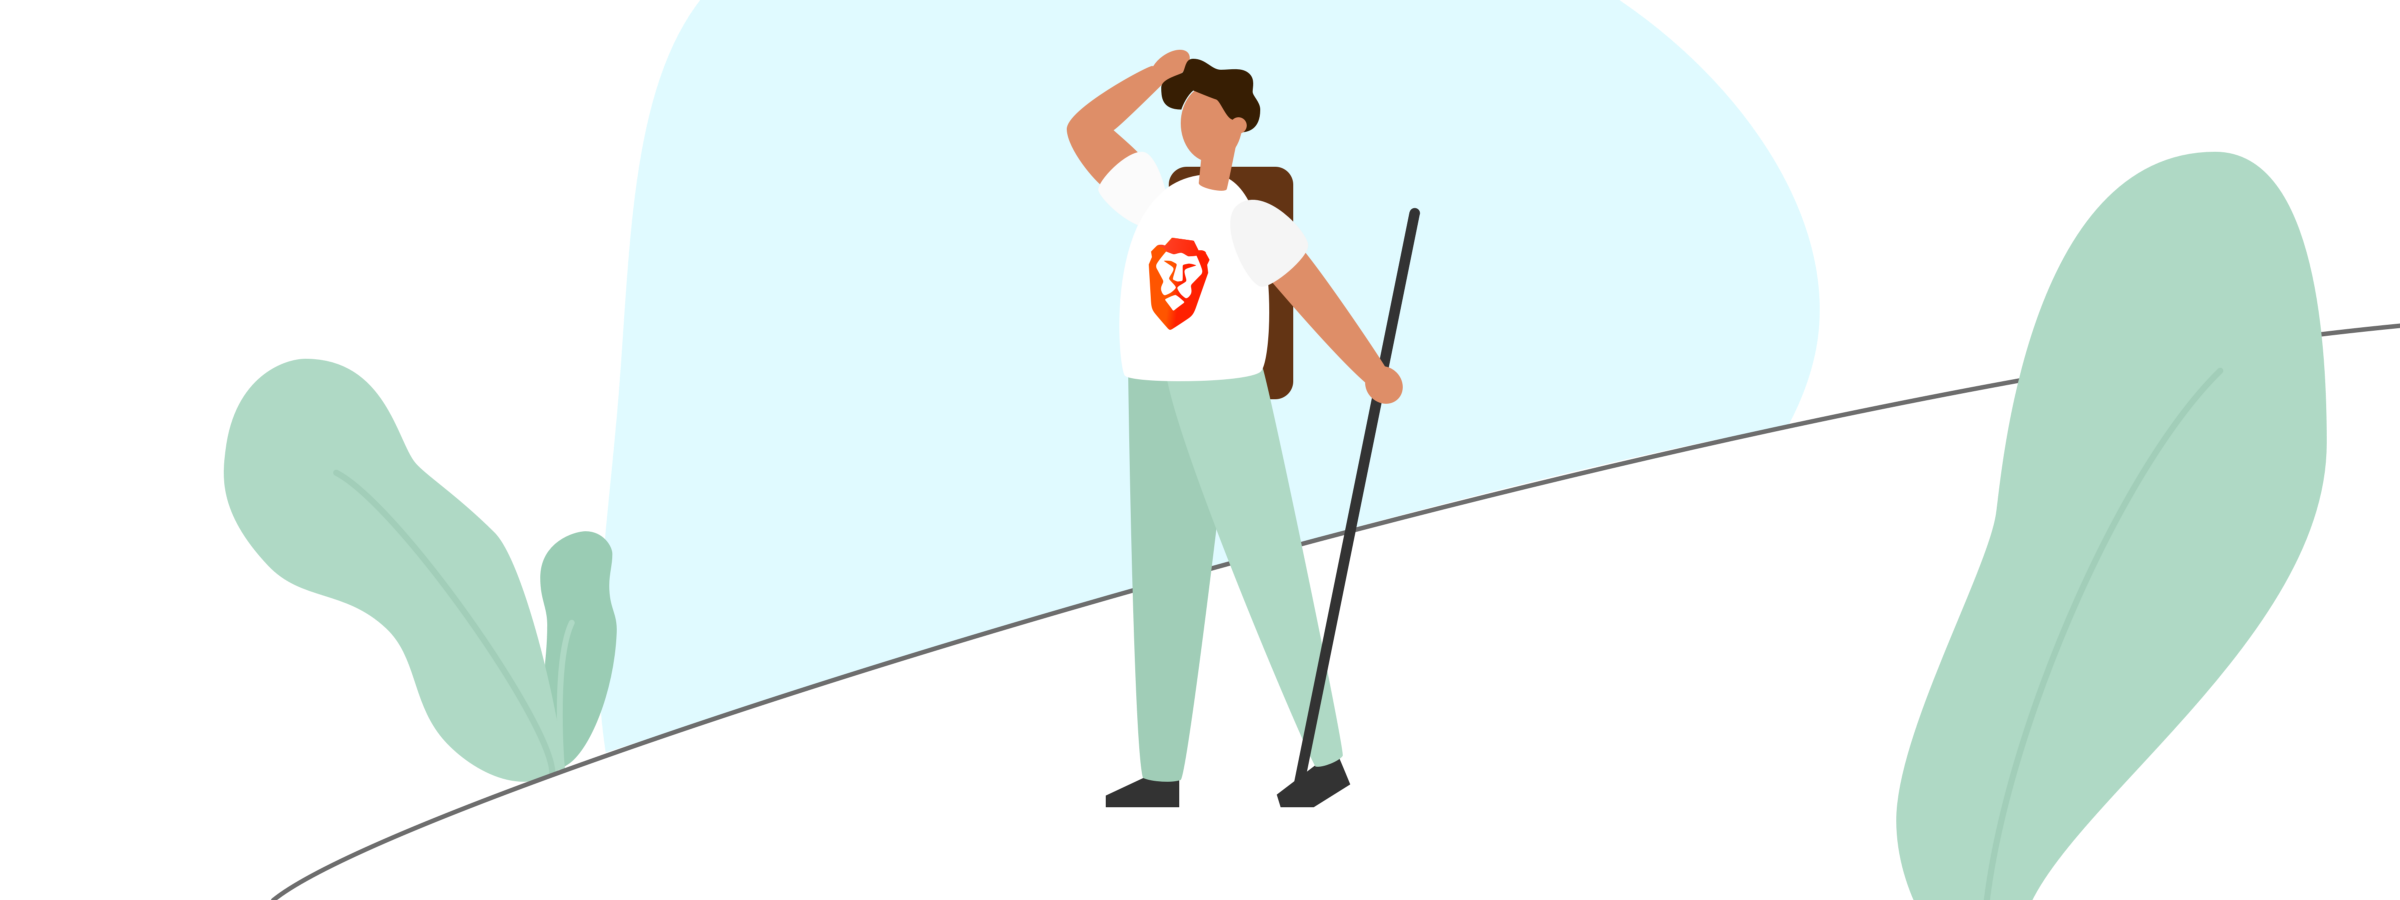 An illustration of a hiker wearing a shirt with the Brave logo